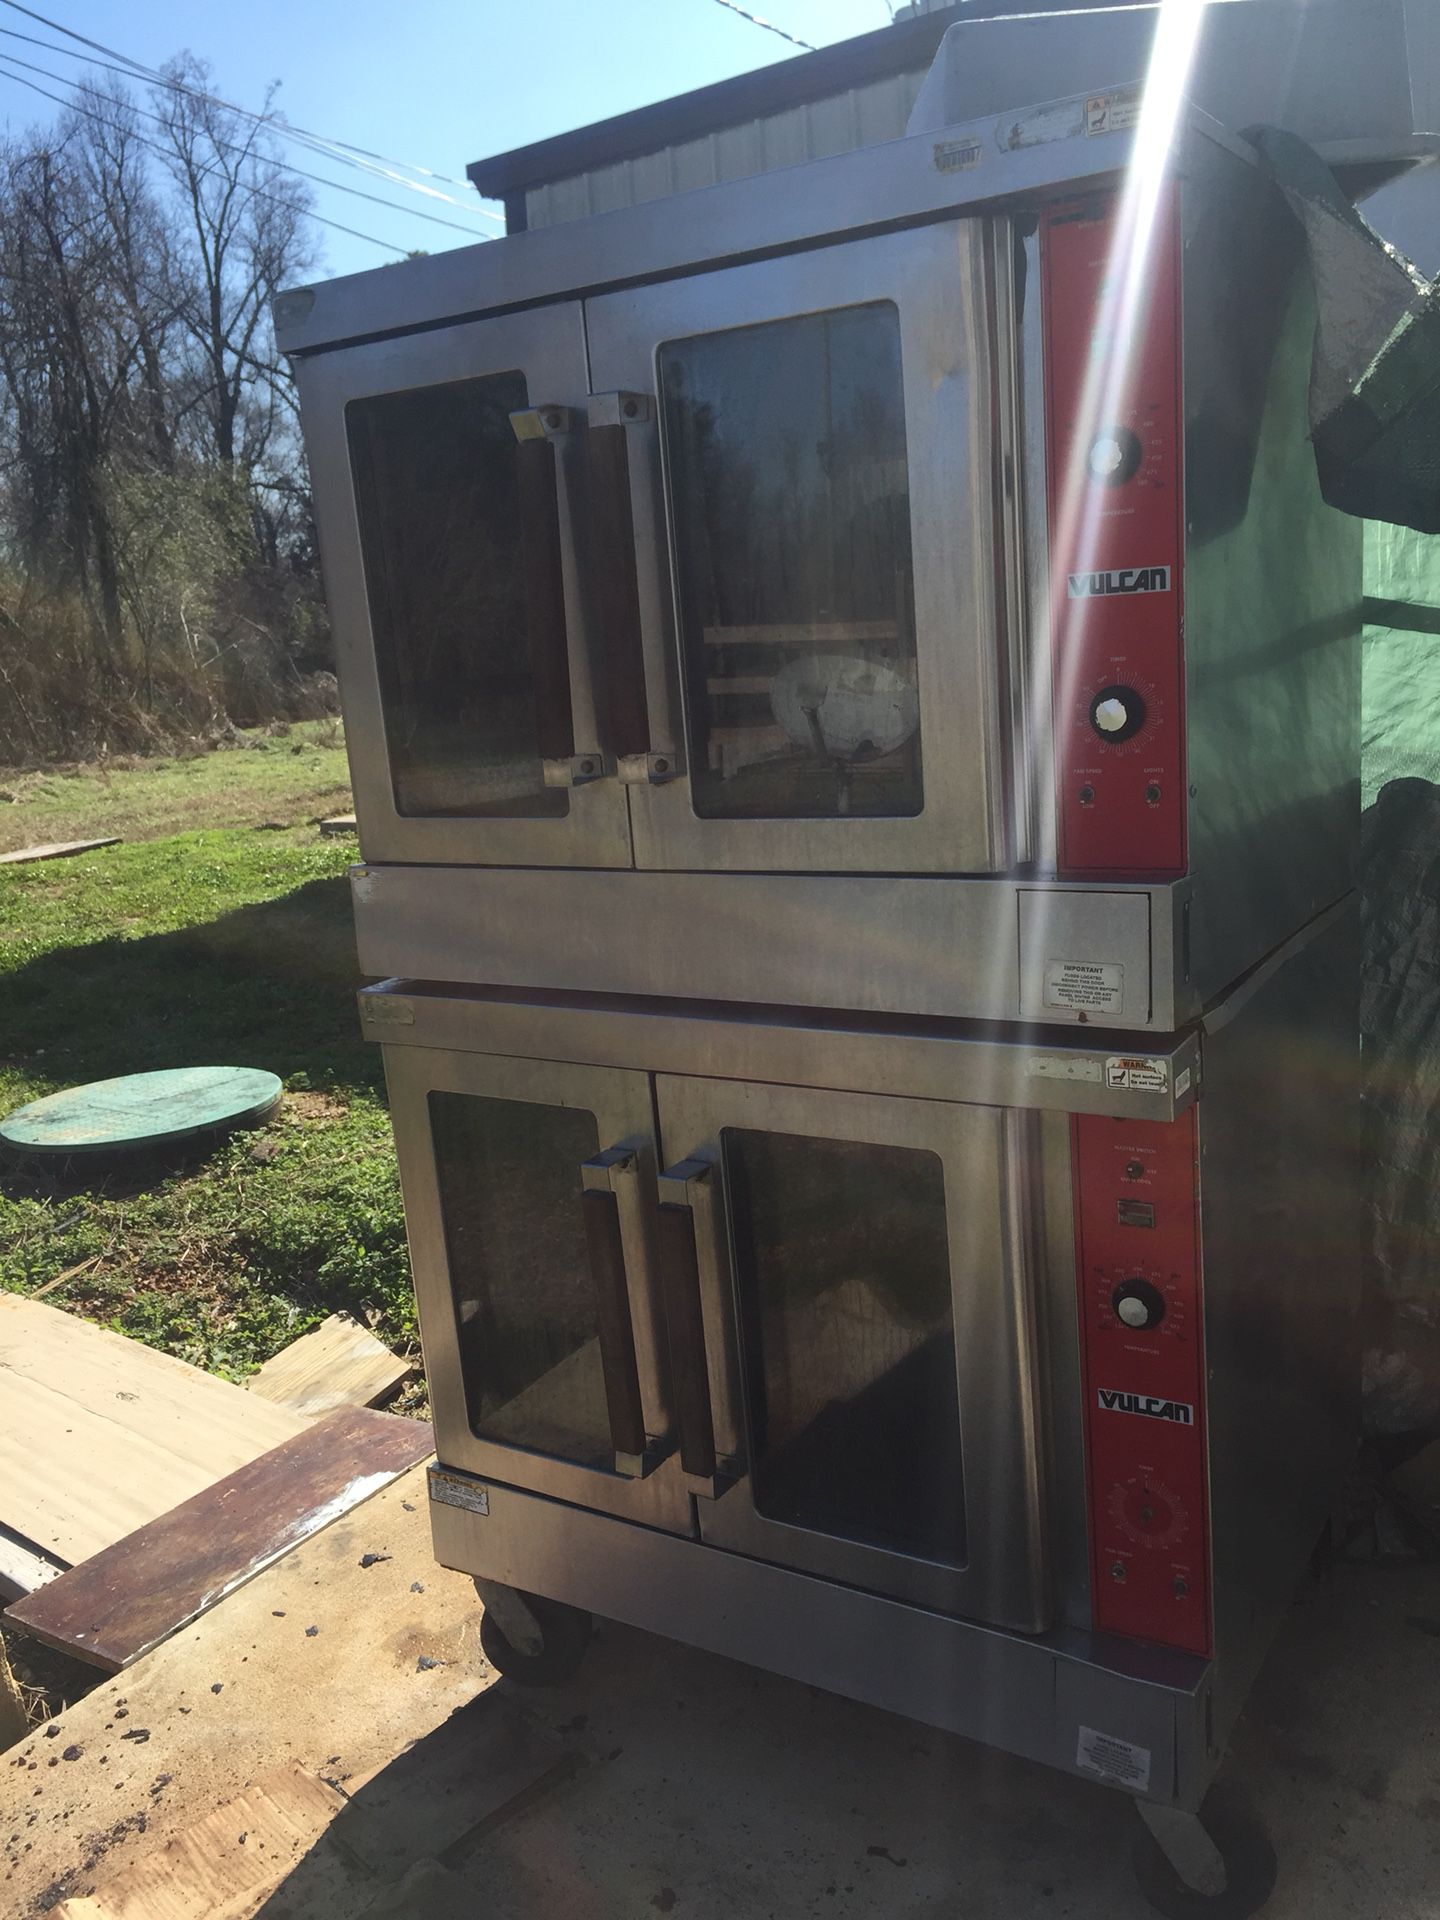 Commercial Convection Oven Double Stack, Electric, VULCAN Brand